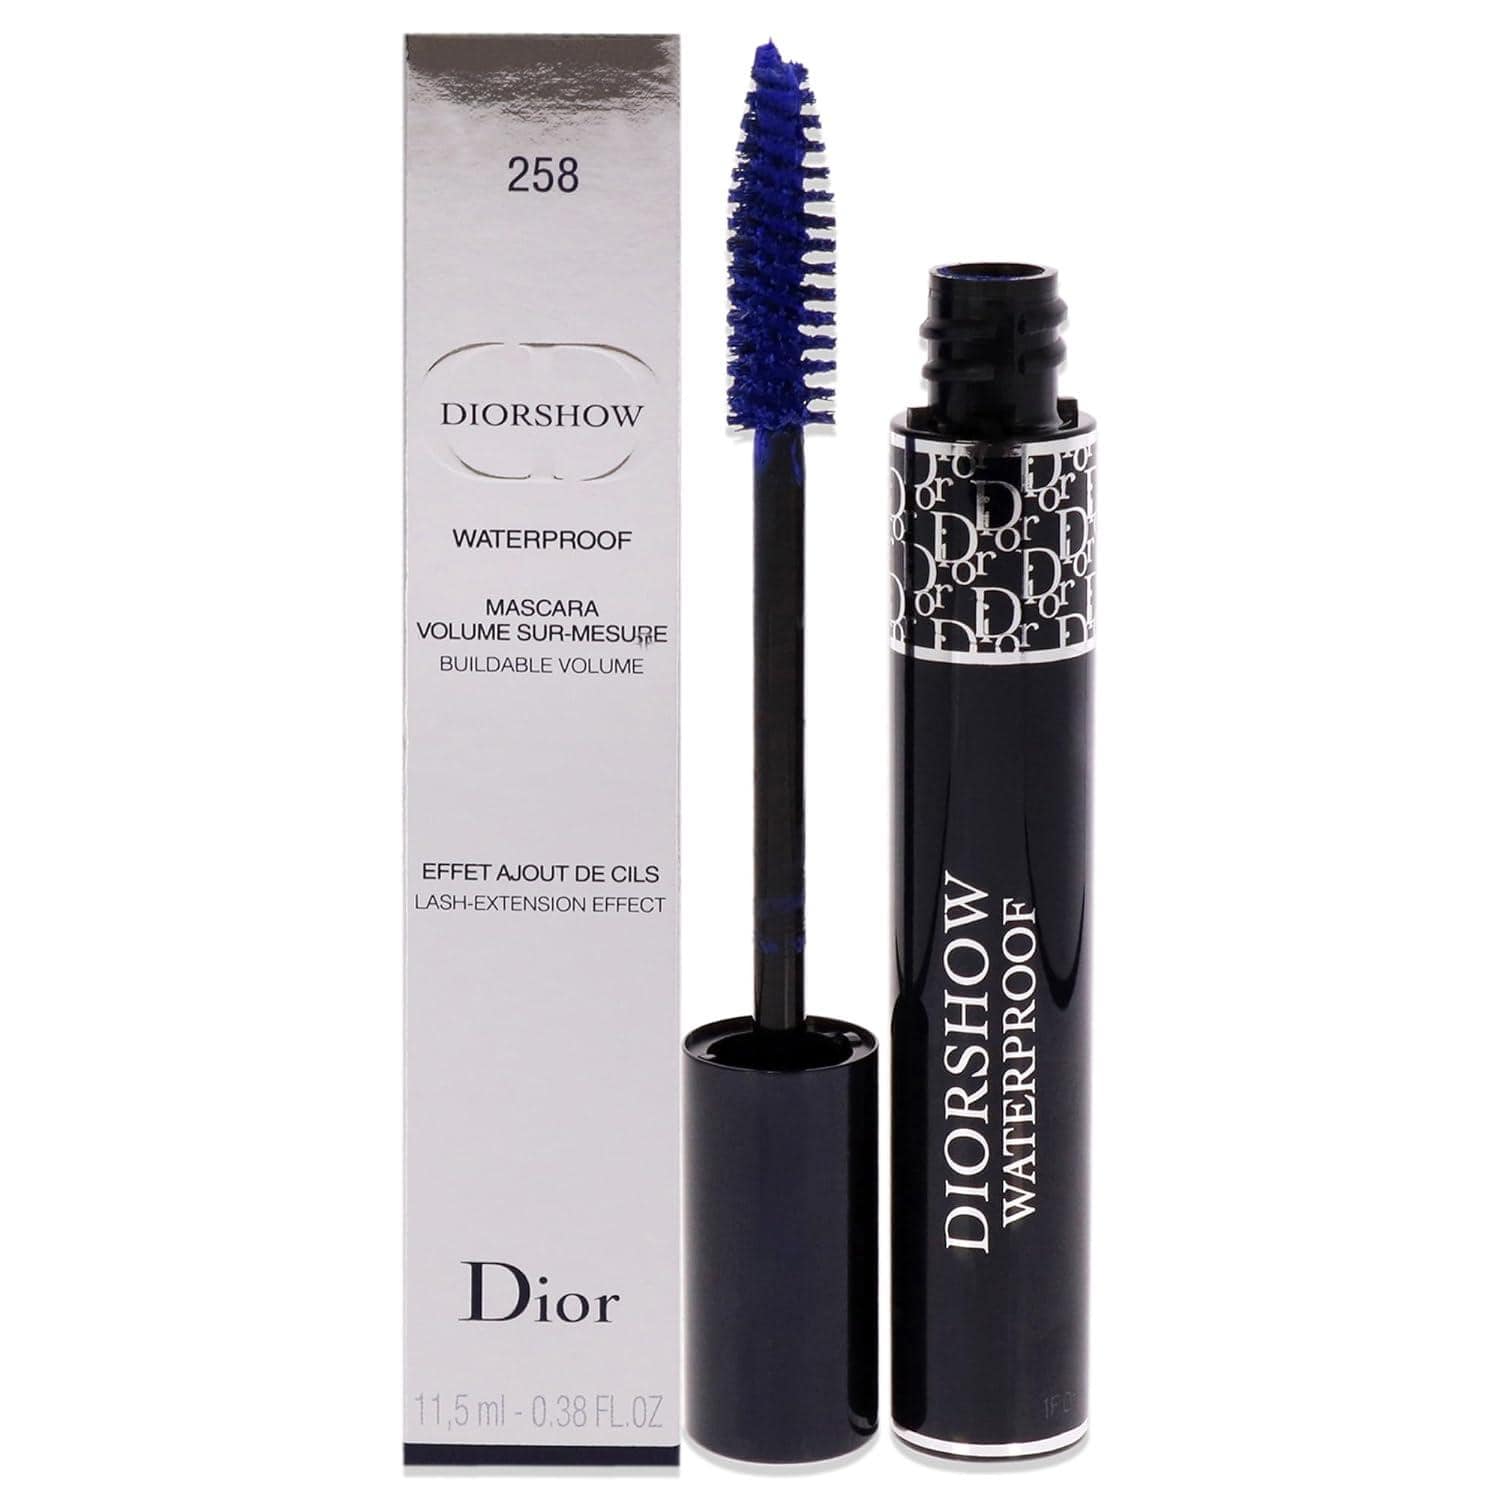 This waterproof mascara, featuring a jumbo brush and nylon microfibers, effortlessly delivers bold, full lashes. With lovely color options catering to different preferences, its standout feature lies in the ability to feather out the ends while adding volume at the roots.